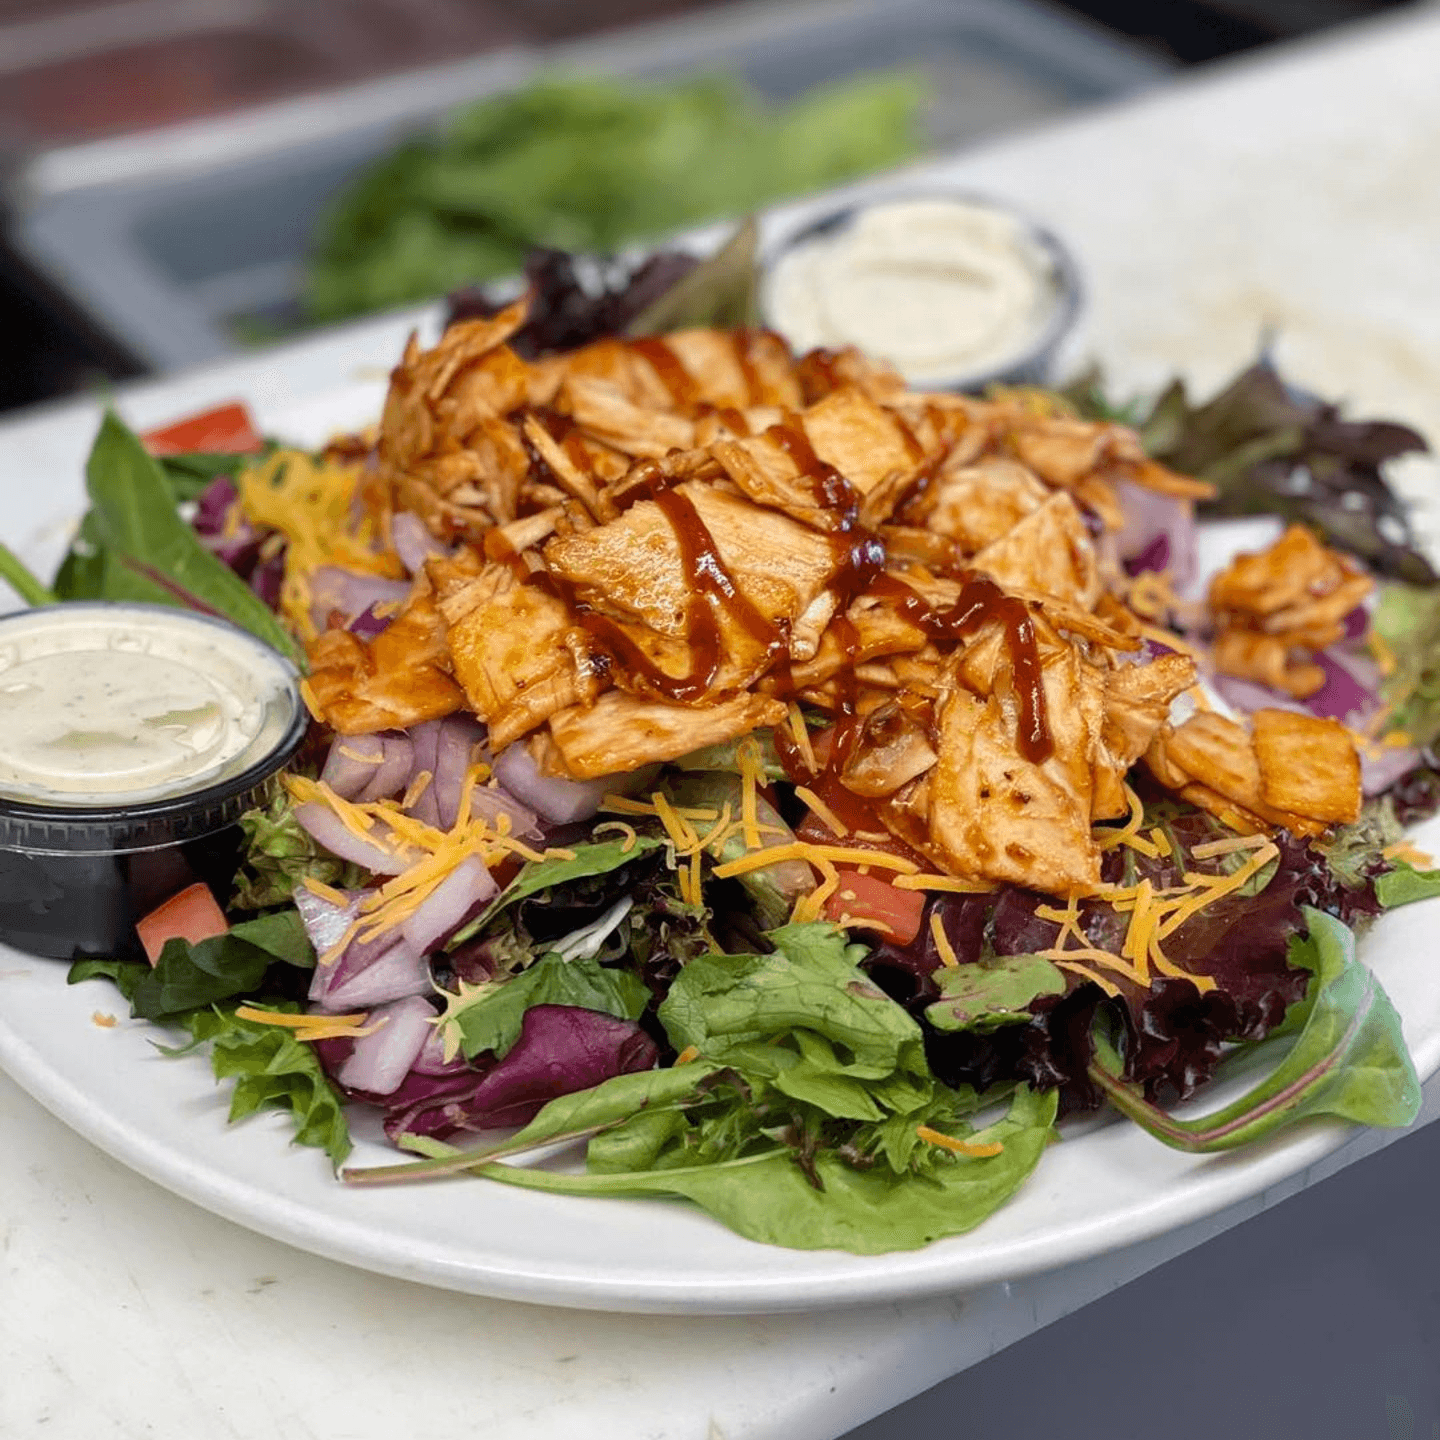 Our Mouthwatering BBQ Chicken Salad! 🥗🔥